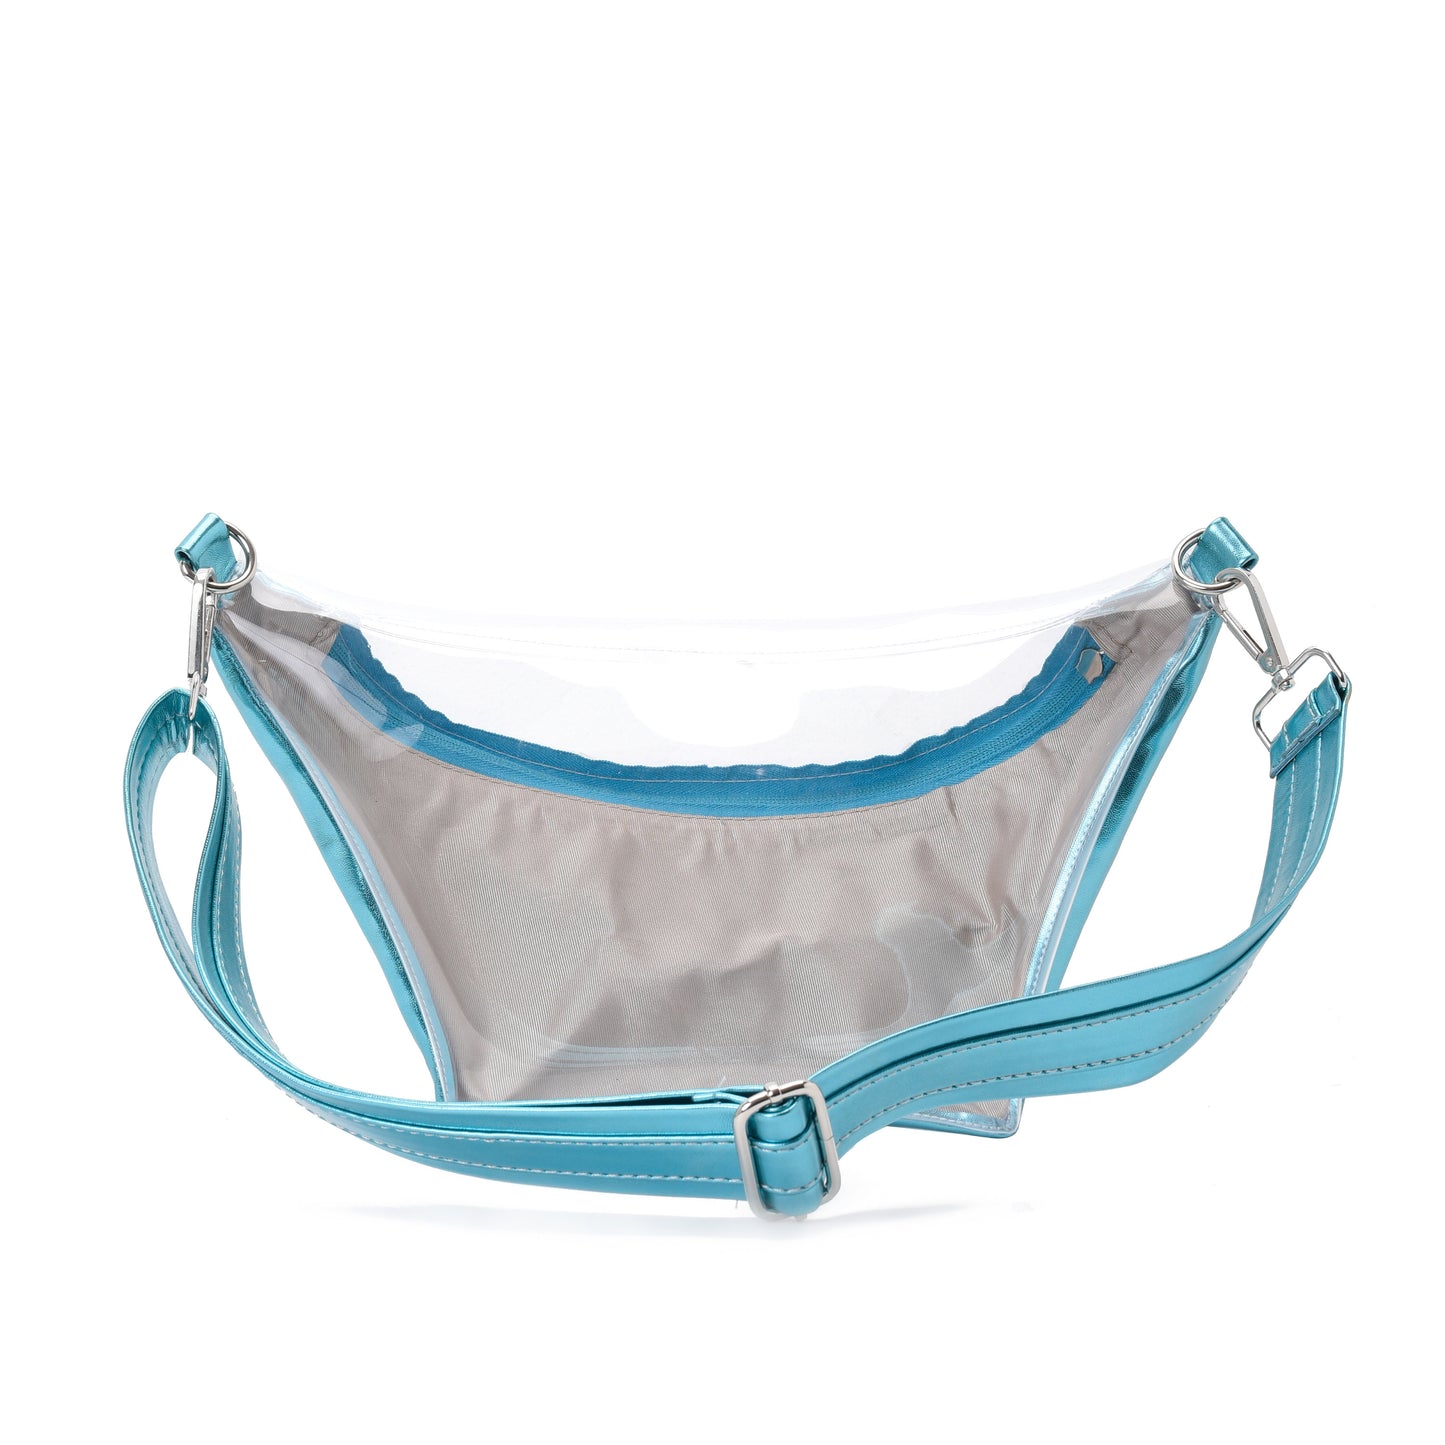 Fanny Beach bag with Metallic Baby Blue Material-3006